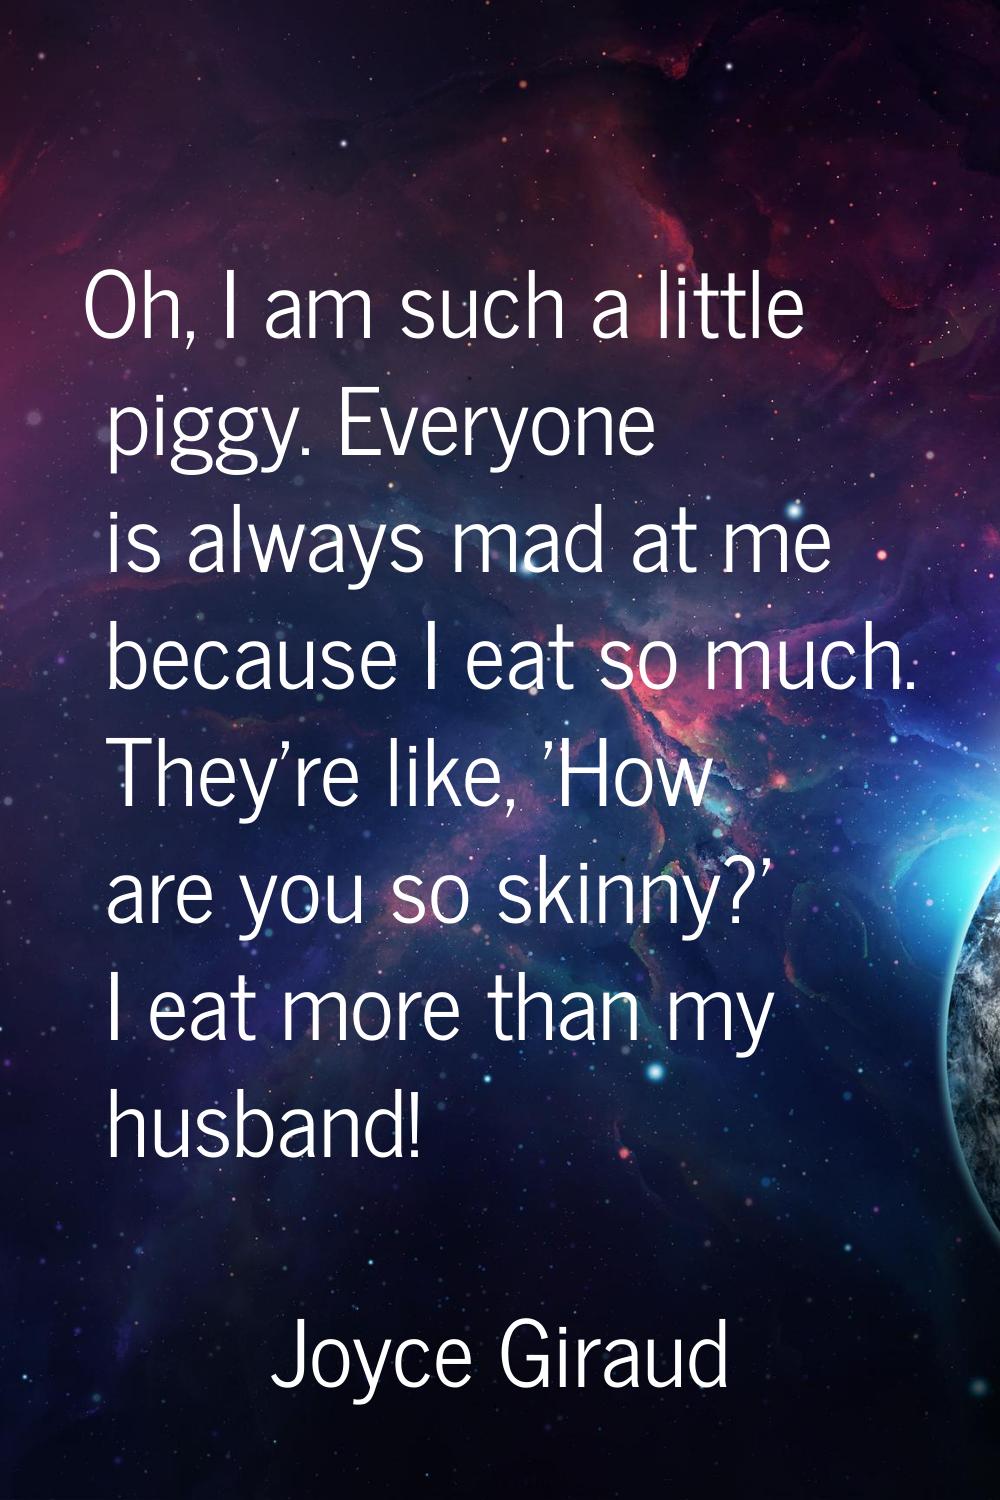 Oh, I am such a little piggy. Everyone is always mad at me because I eat so much. They're like, 'Ho